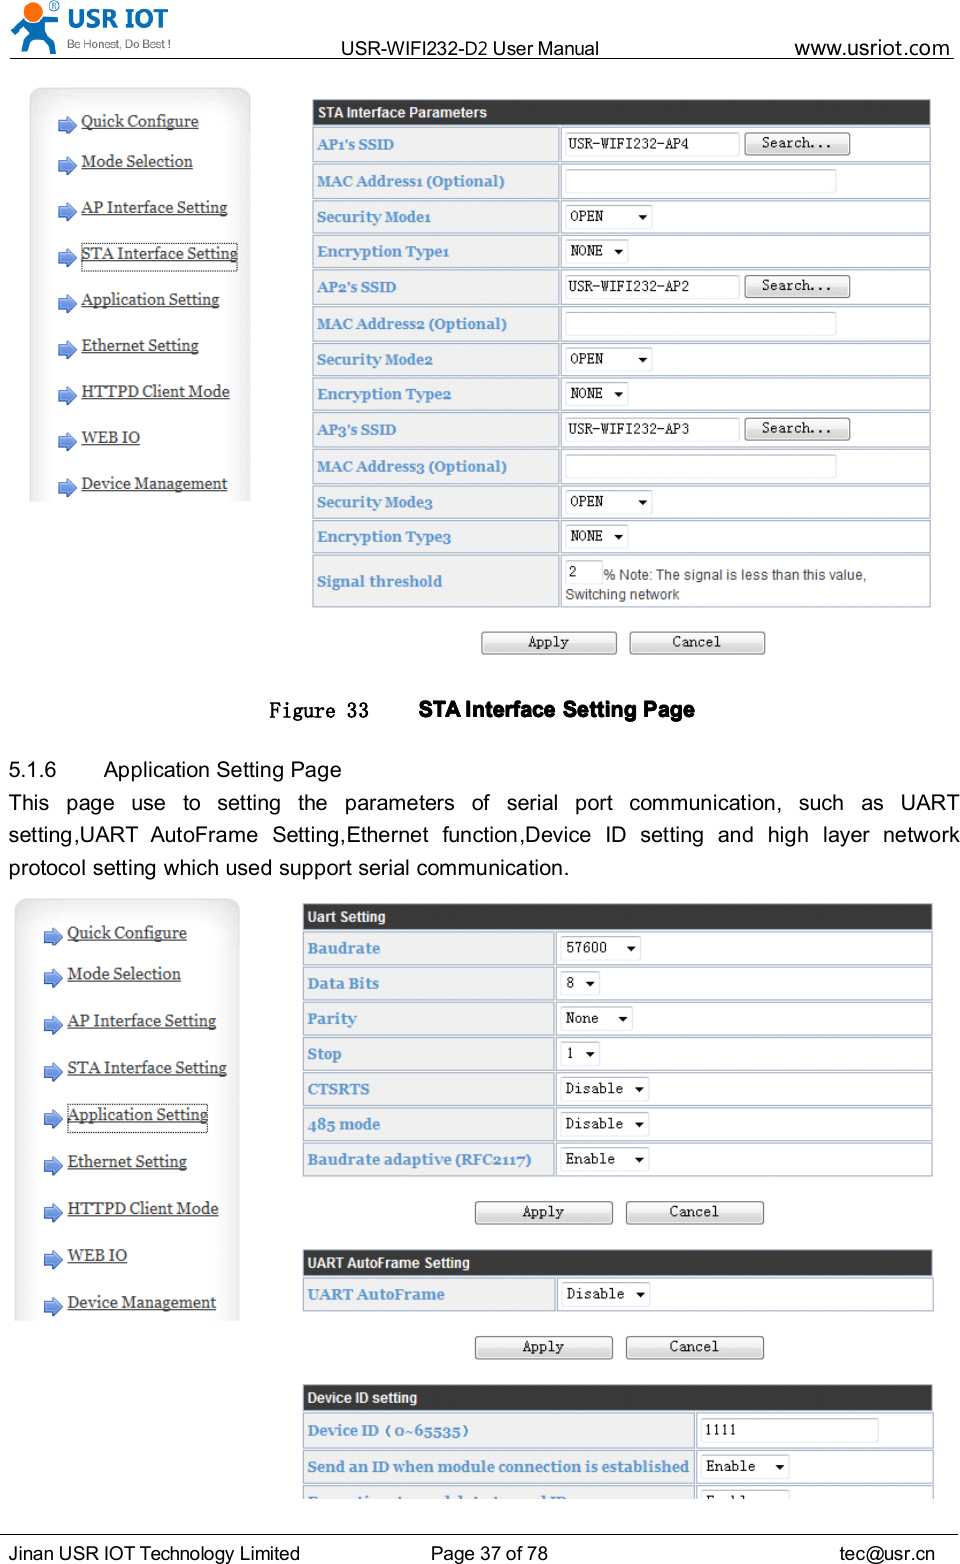 USR-WIFI232- D2 User Manual www.usr iot .comJinan USR IOT Technology Limited Page 37 of 78 tec@usr.cnFigure 33 STASTASTASTA InterfaceInterfaceInterfaceInterface SettingSettingSettingSetting PagePagePagePage5.1.6 Application Setting PageThis page use to setting the parameters of serial port communication, such as UARTsetting , UART AutoFrame Setting , Ethernet function ,Device ID setting and high layer networkprotocol setting which used support serial communication.